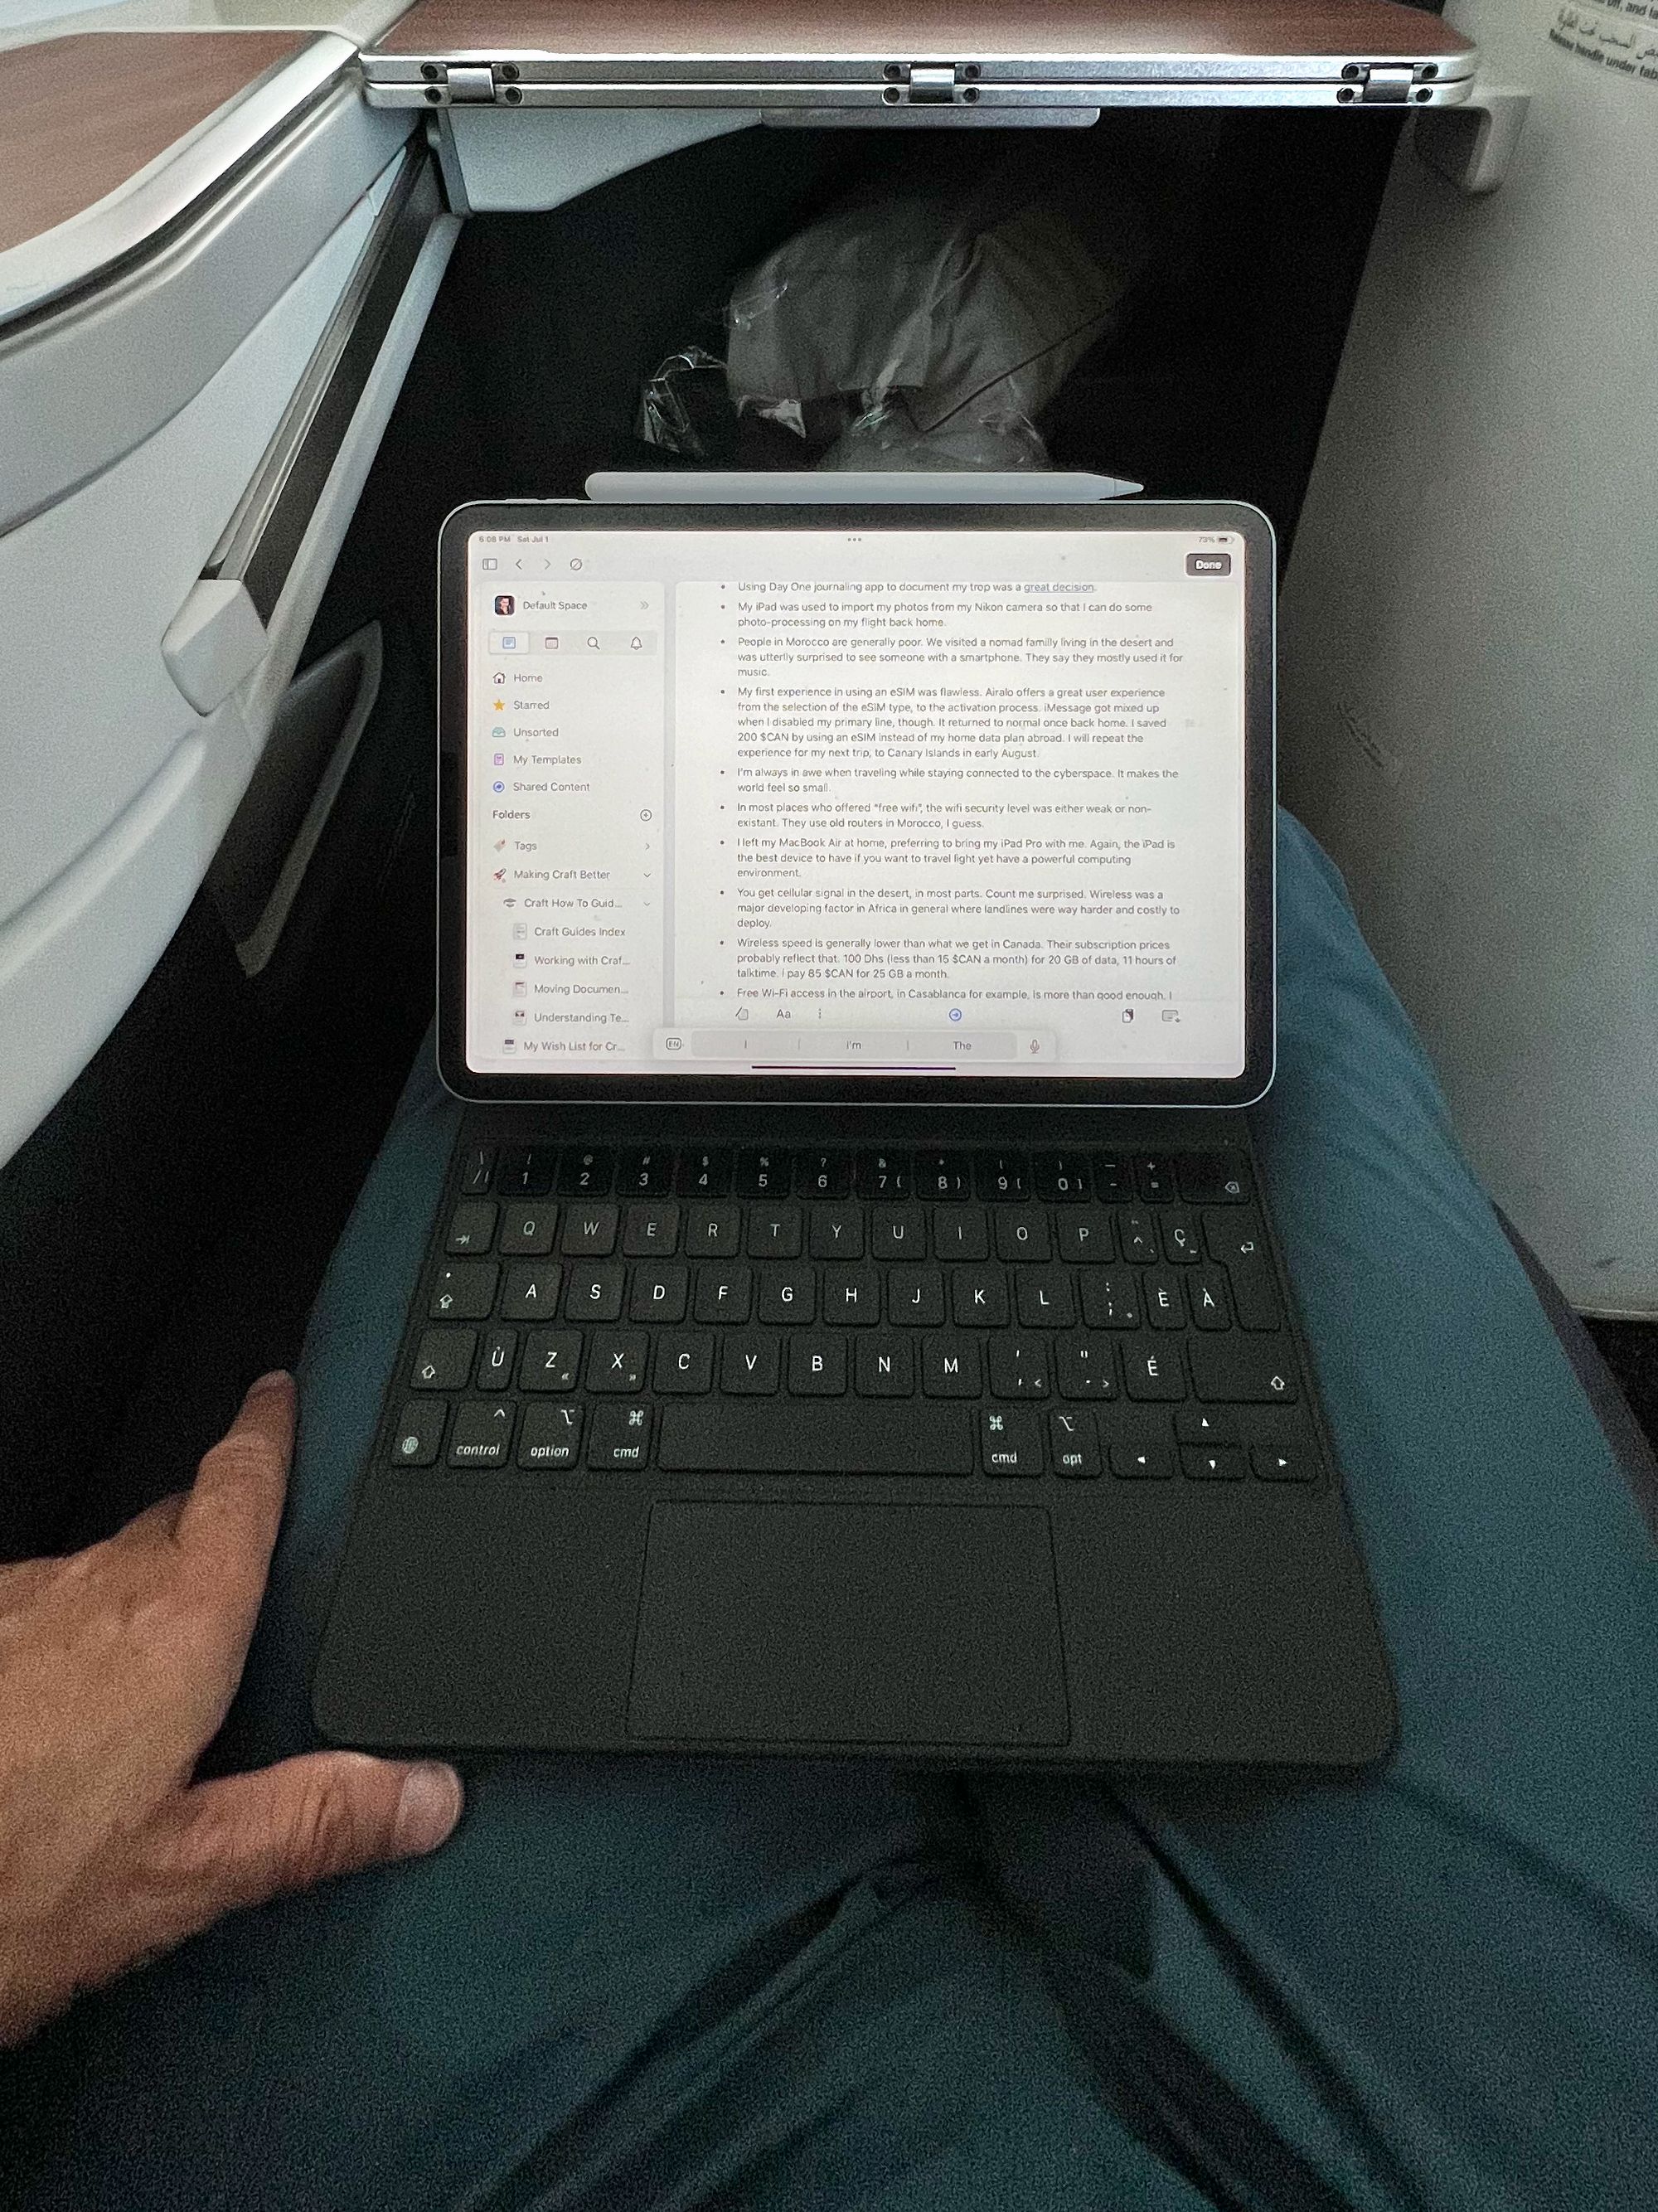 On my way back home, writing this article on my iPad